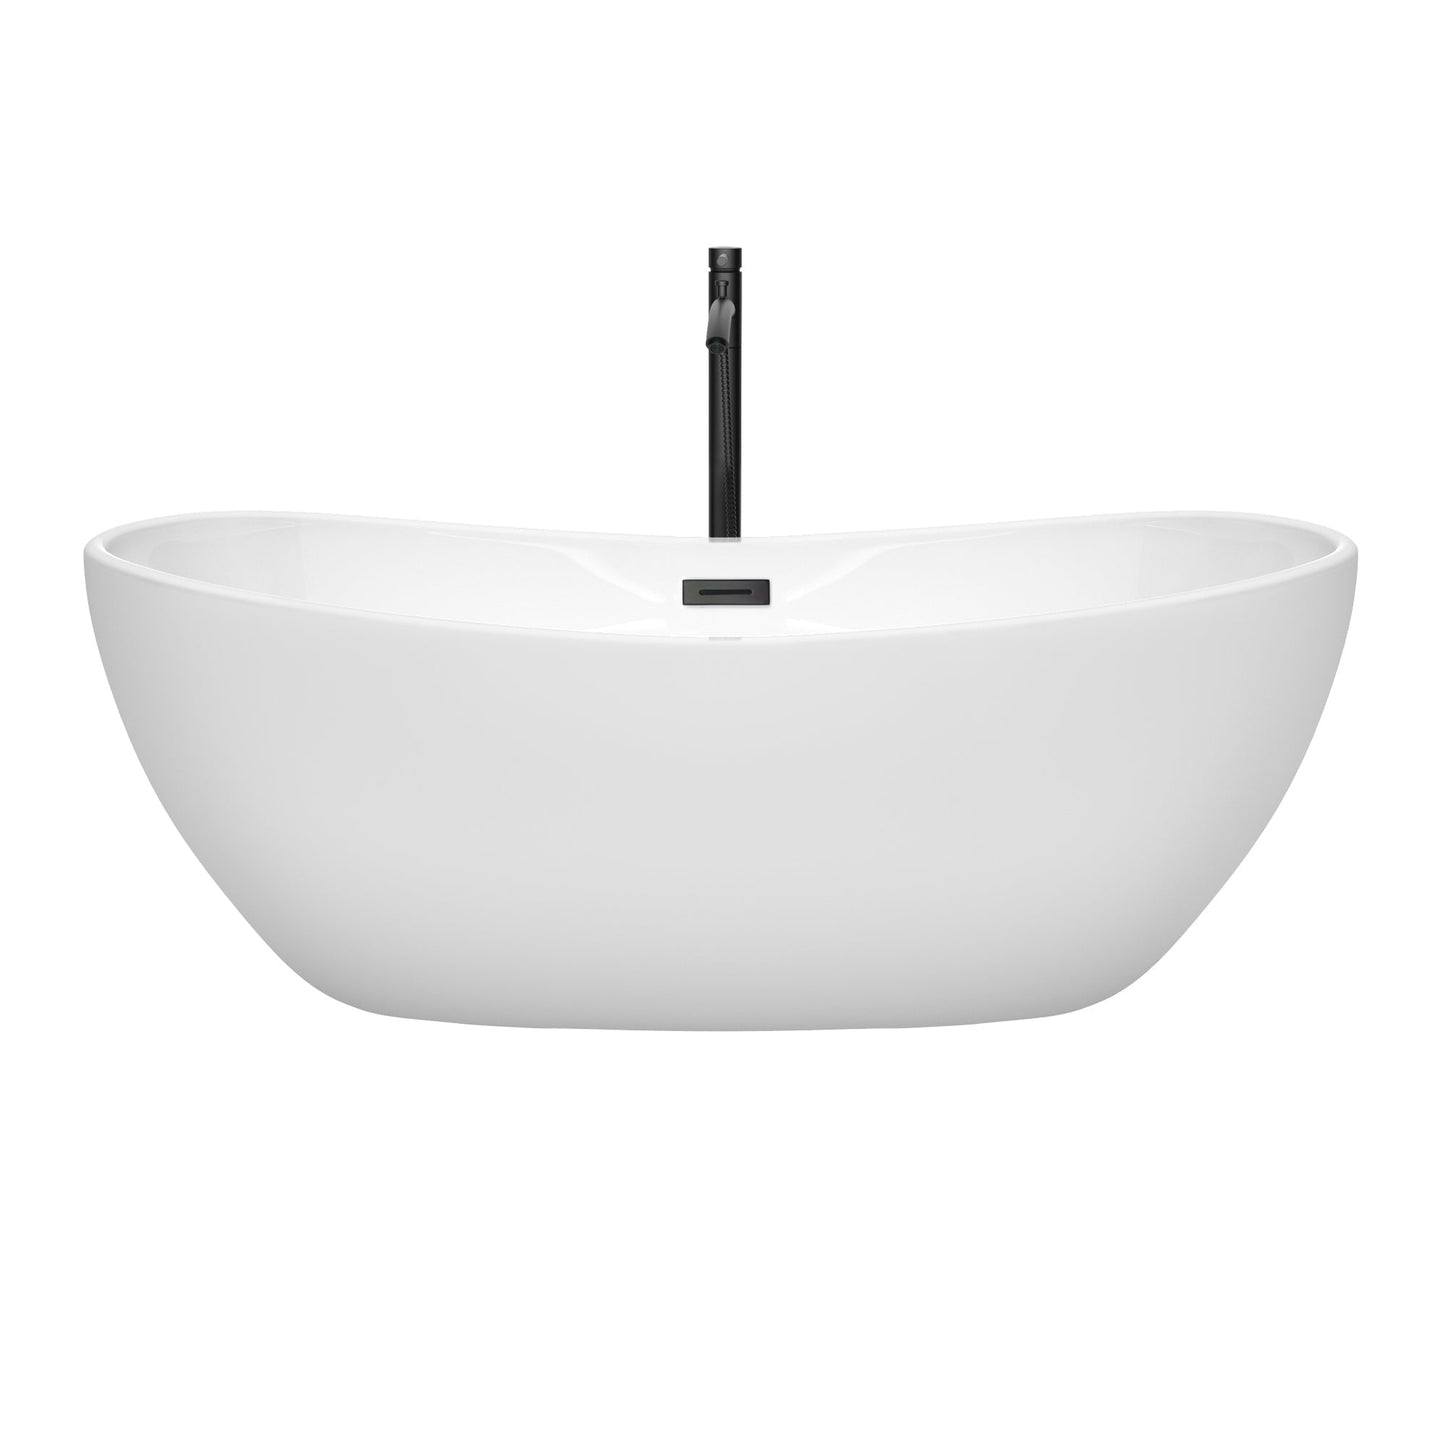 Wyndham Collection Rebecca 65" Freestanding Bathtub in White With Floor Mounted Faucet, Drain and Overflow Trim in Matte Black